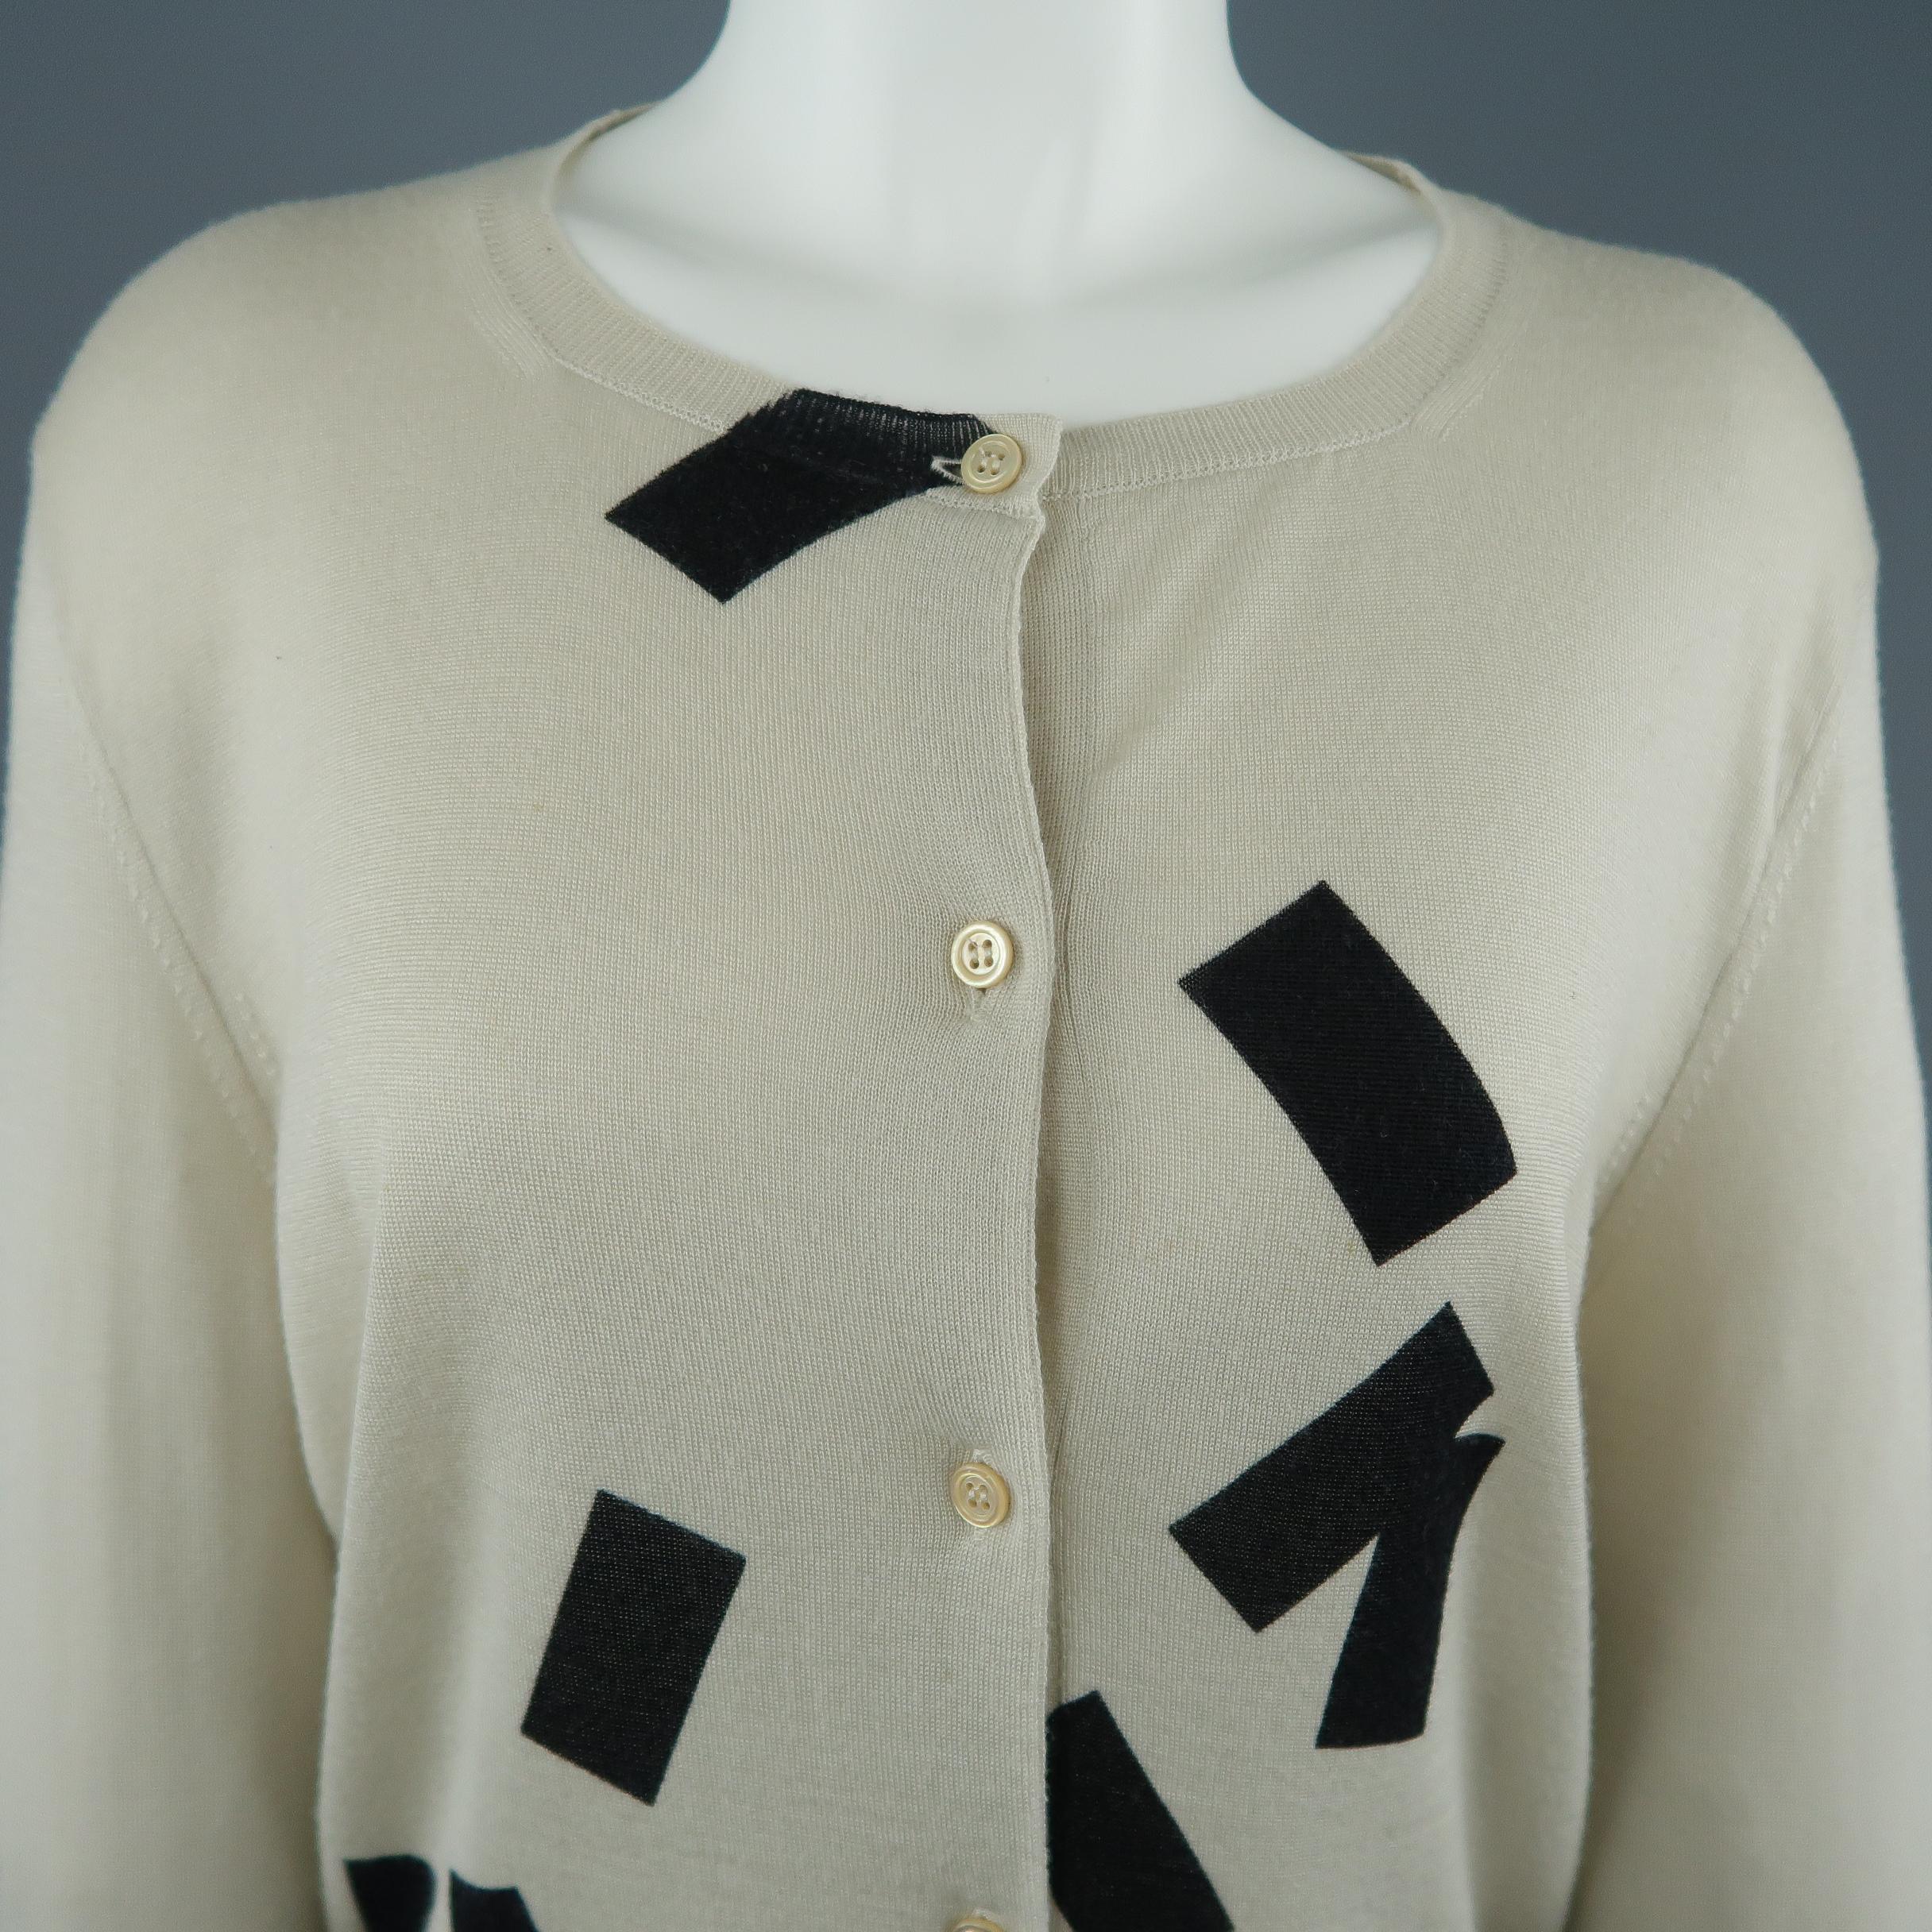 BOTTEGA VENETA cardigan comes in beige cashmere silk blend knit with a round neckline, button up front, and black geometric print throughout. Made in Italy.
 
Excellent Pre-Owned Condition.
Marked: IT 44
 
Measurements:
 
Shoulder: 17 in.
Chest: 40